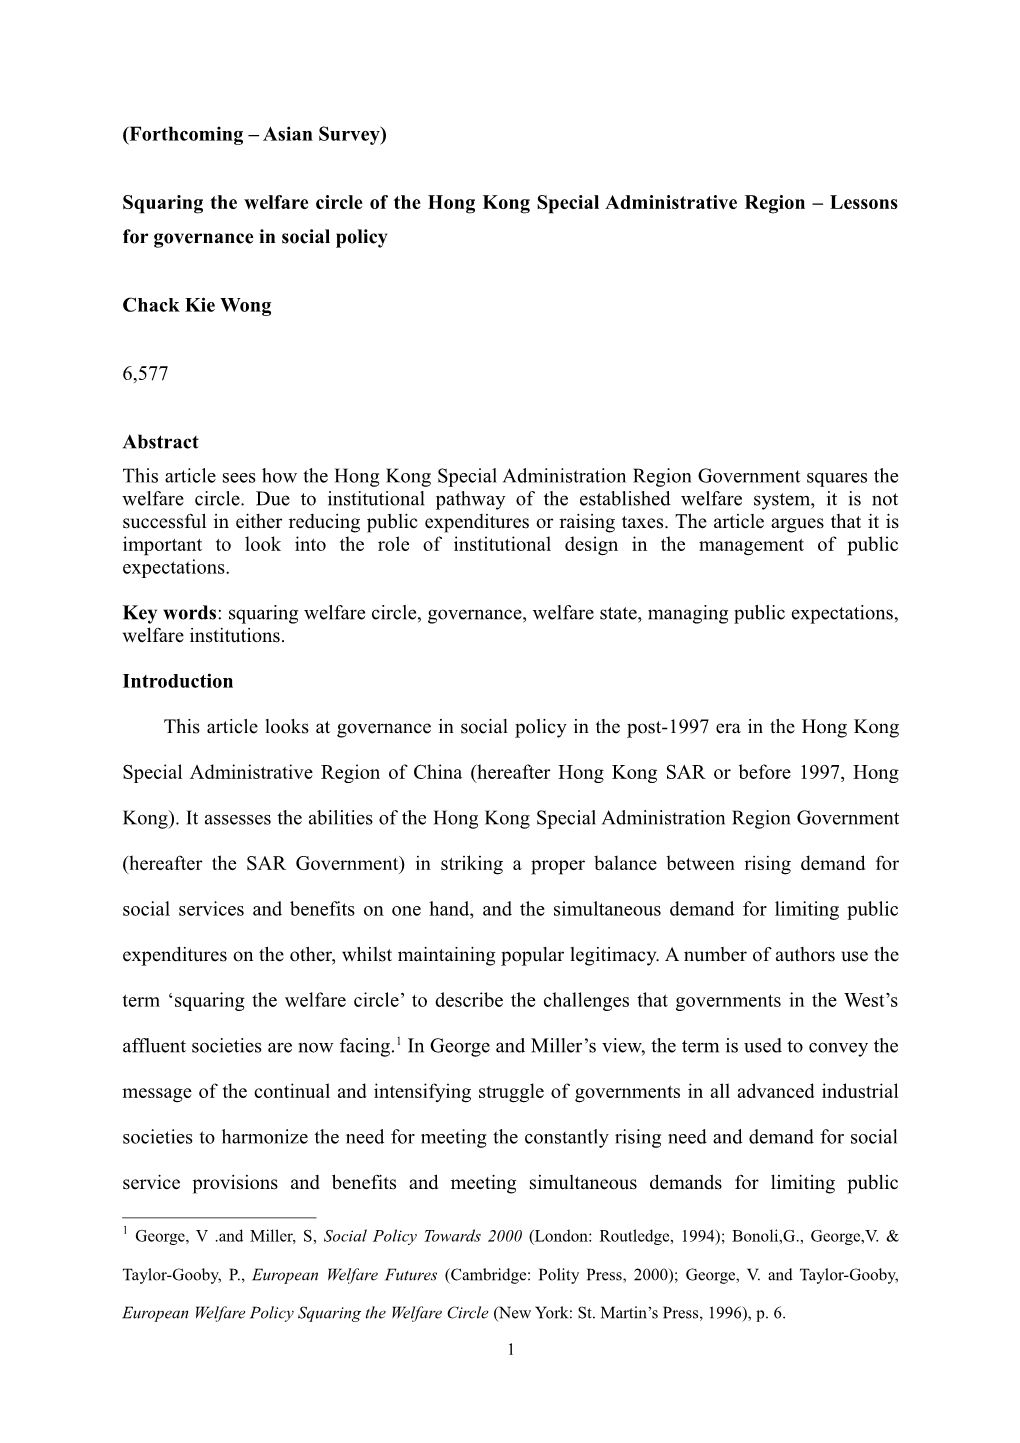 Squaring the Welfare Circle of the Hong Kong Special Administrative Region Lessons For